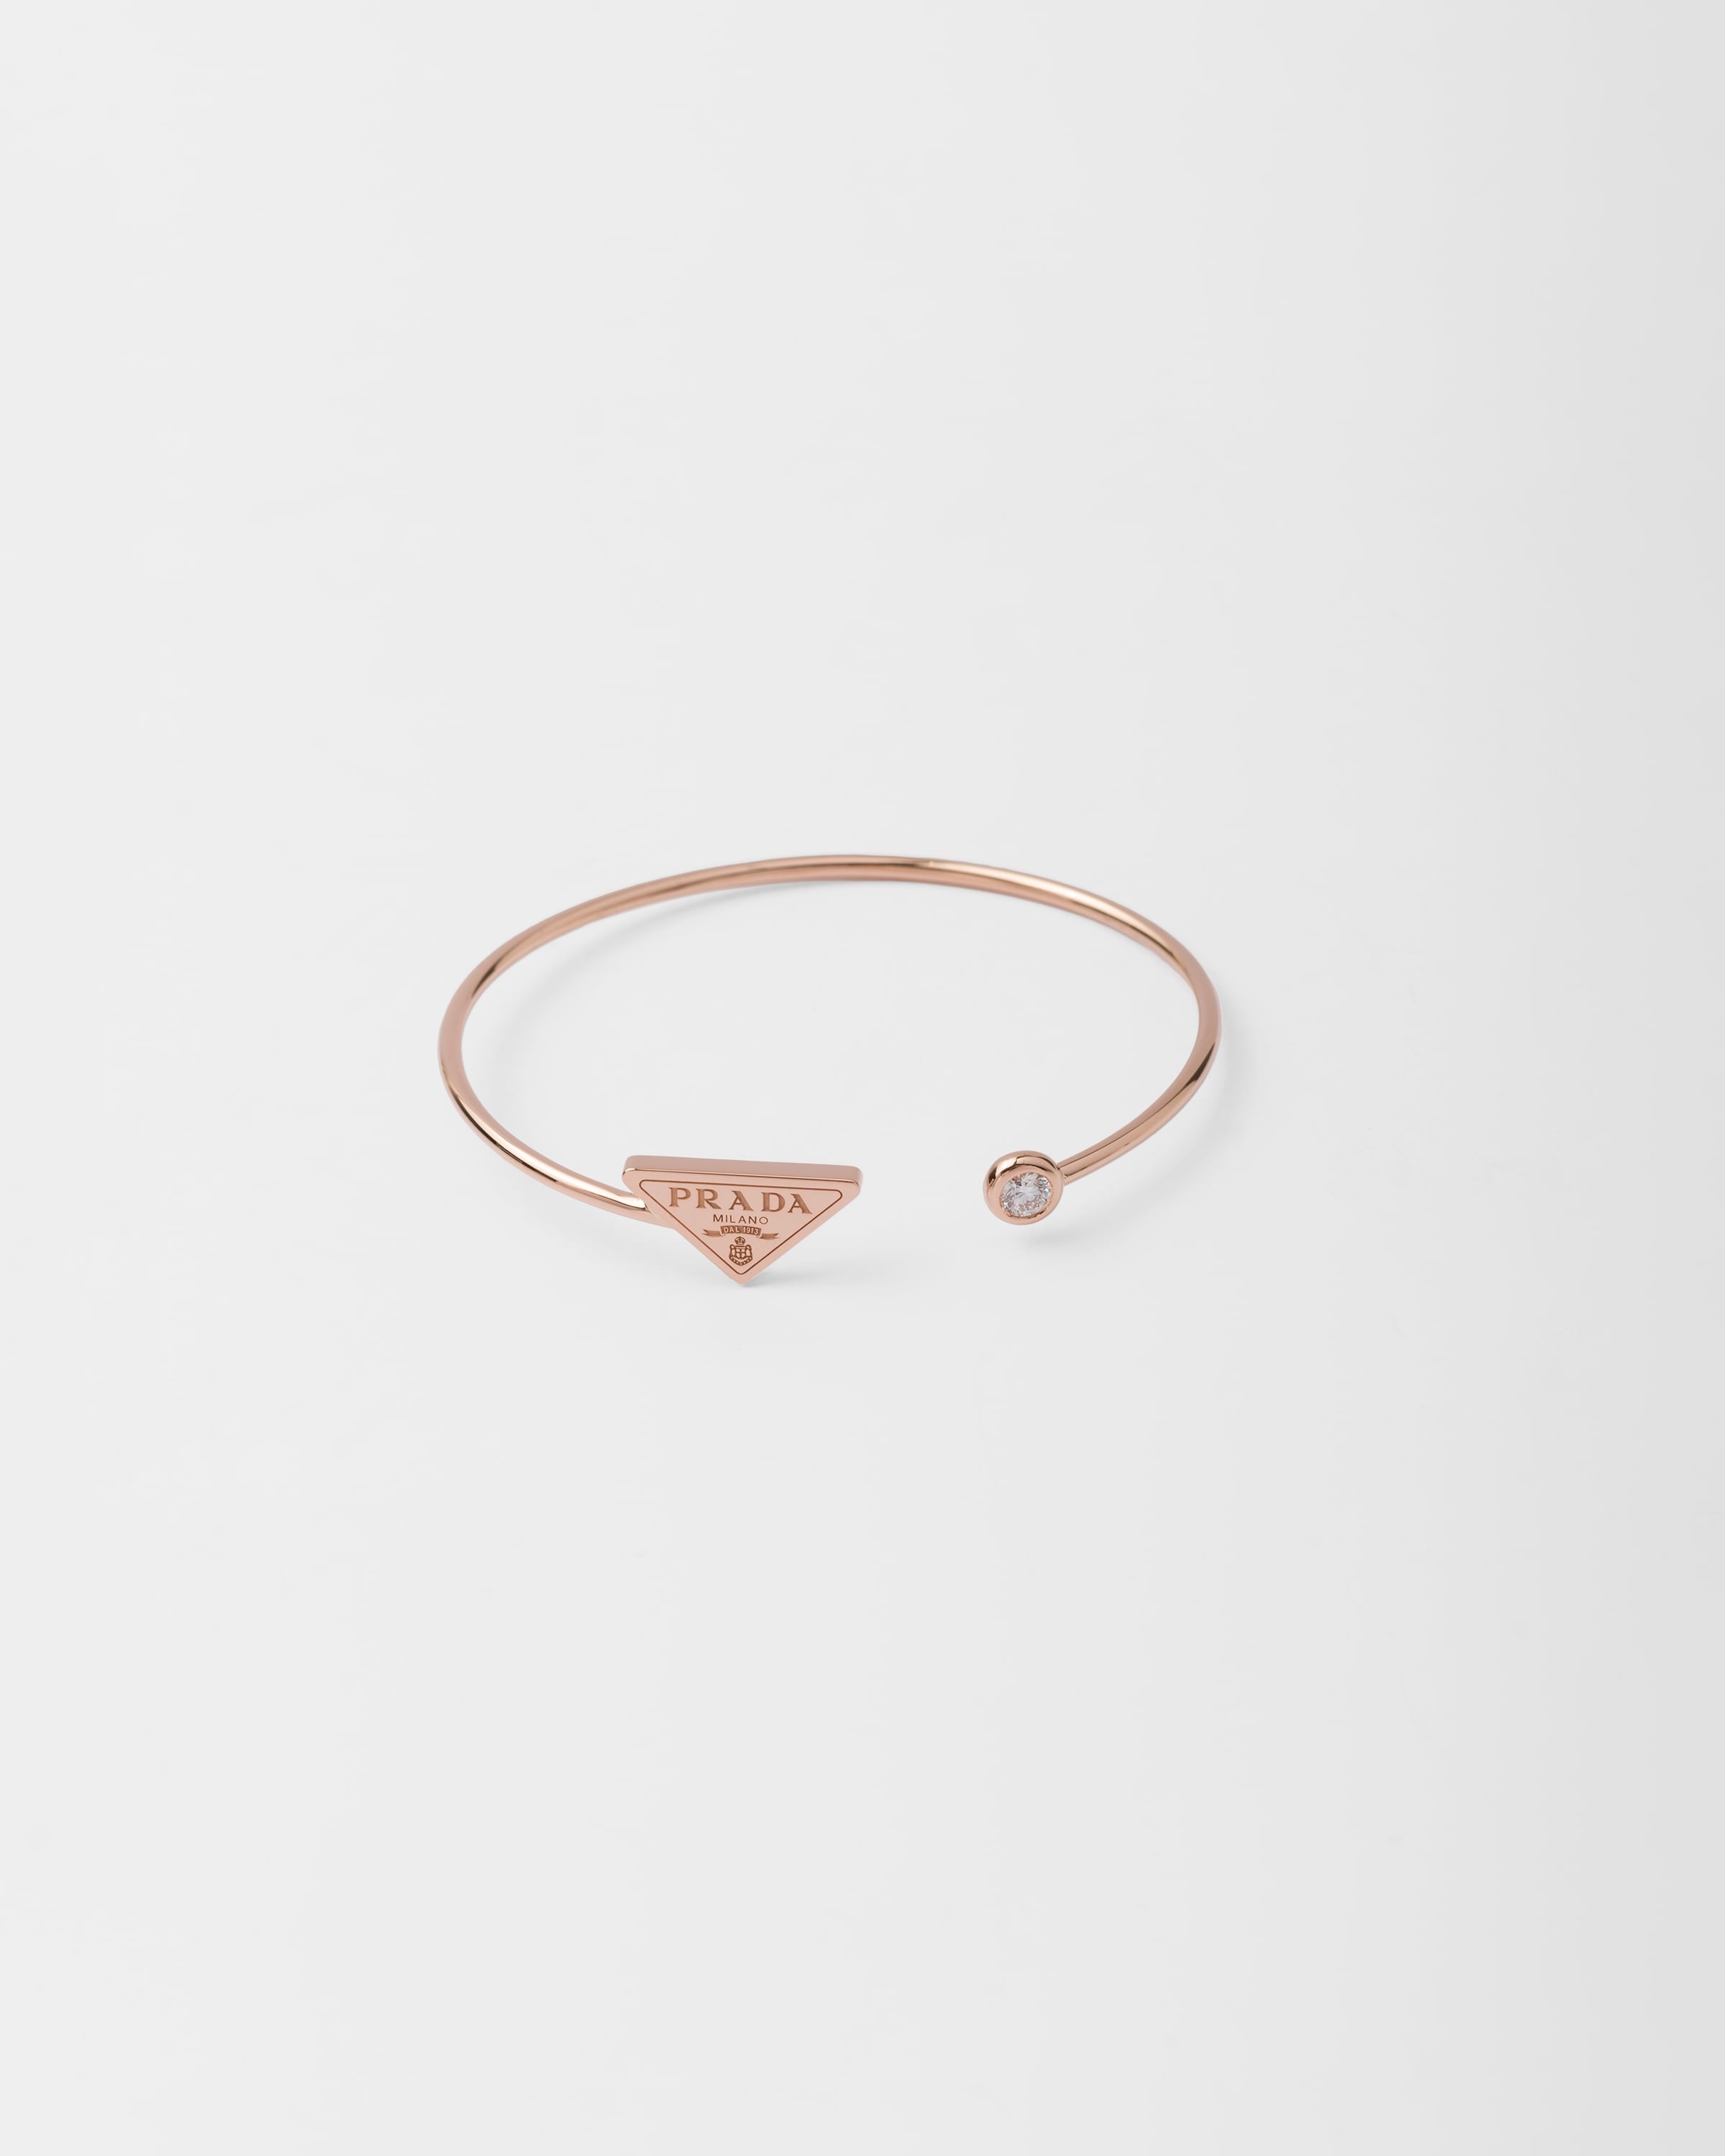 Eternal Gold bangle bracelet in pink gold with diamond - 2